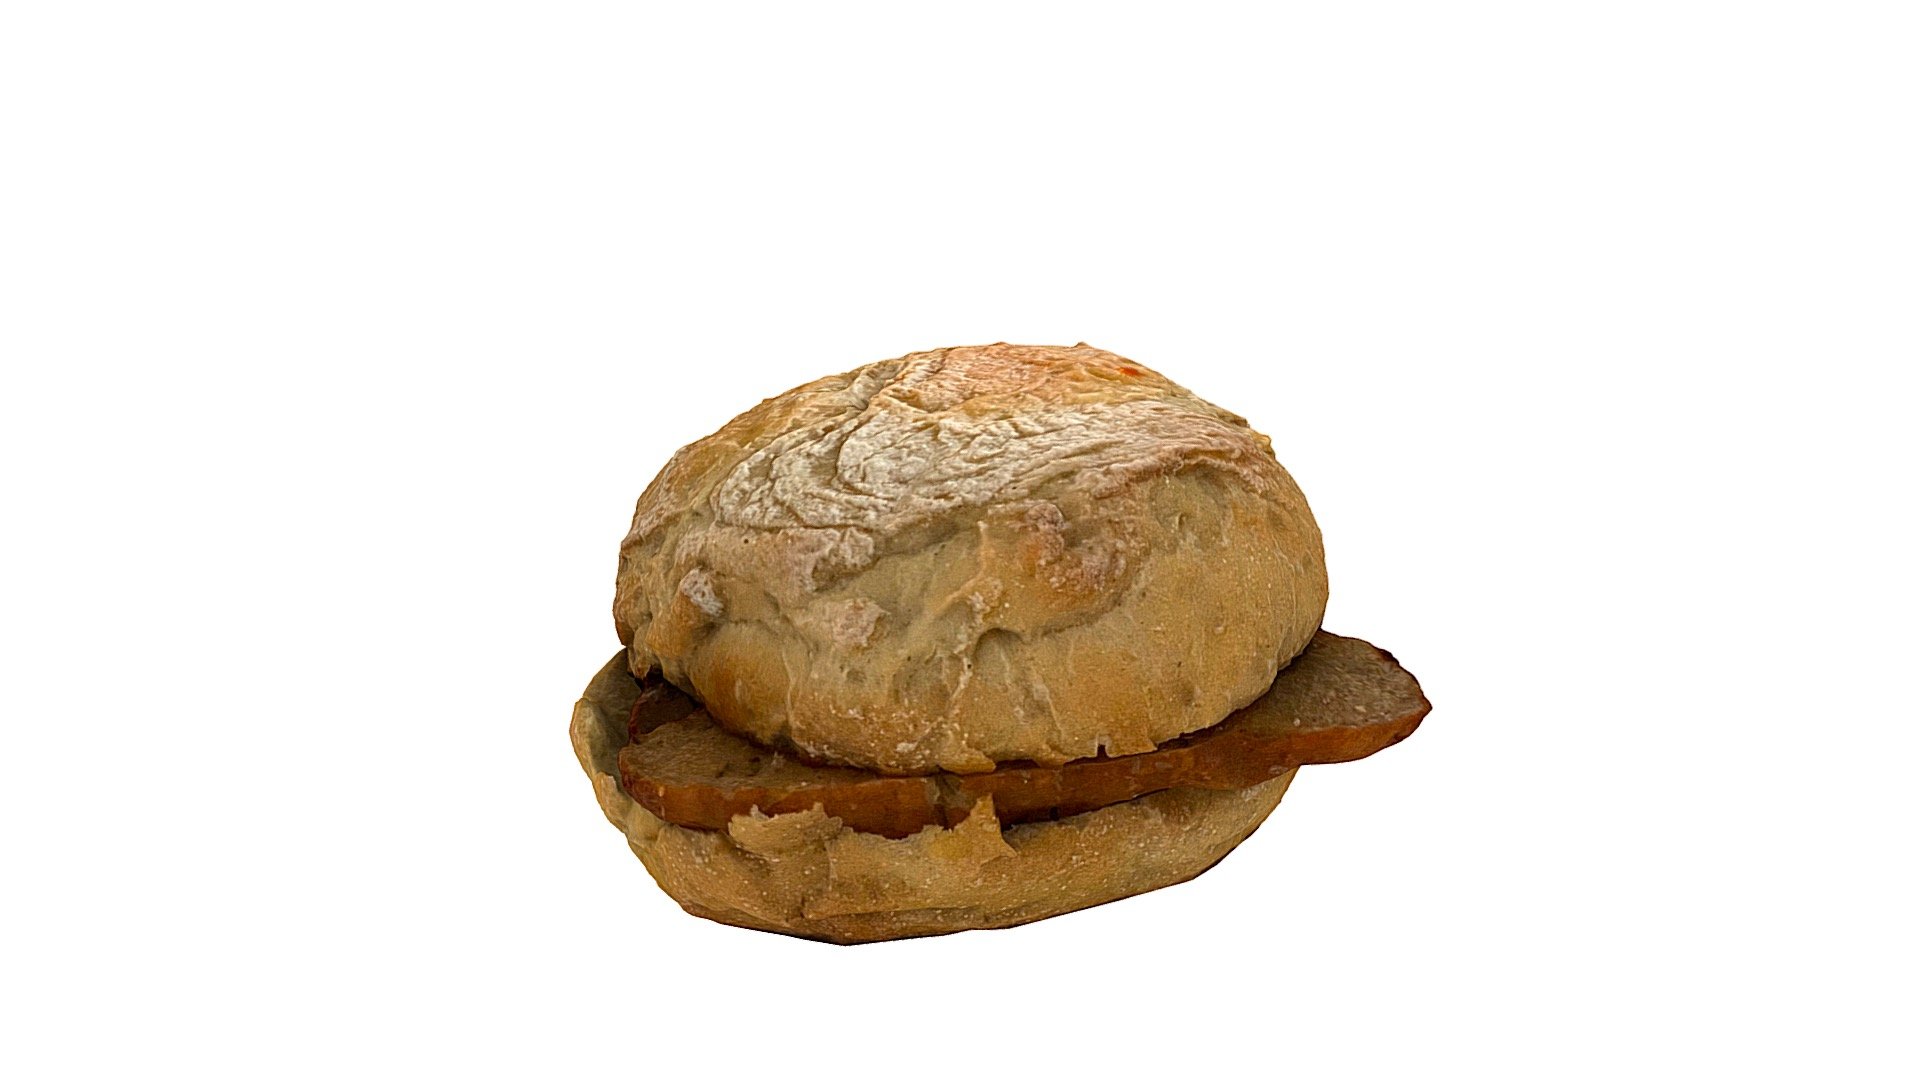 Breakfast, this morning, a sausage bap

Created with Polycam - Sausage Bap - Buy Royalty Free 3D model by uStock 3d model